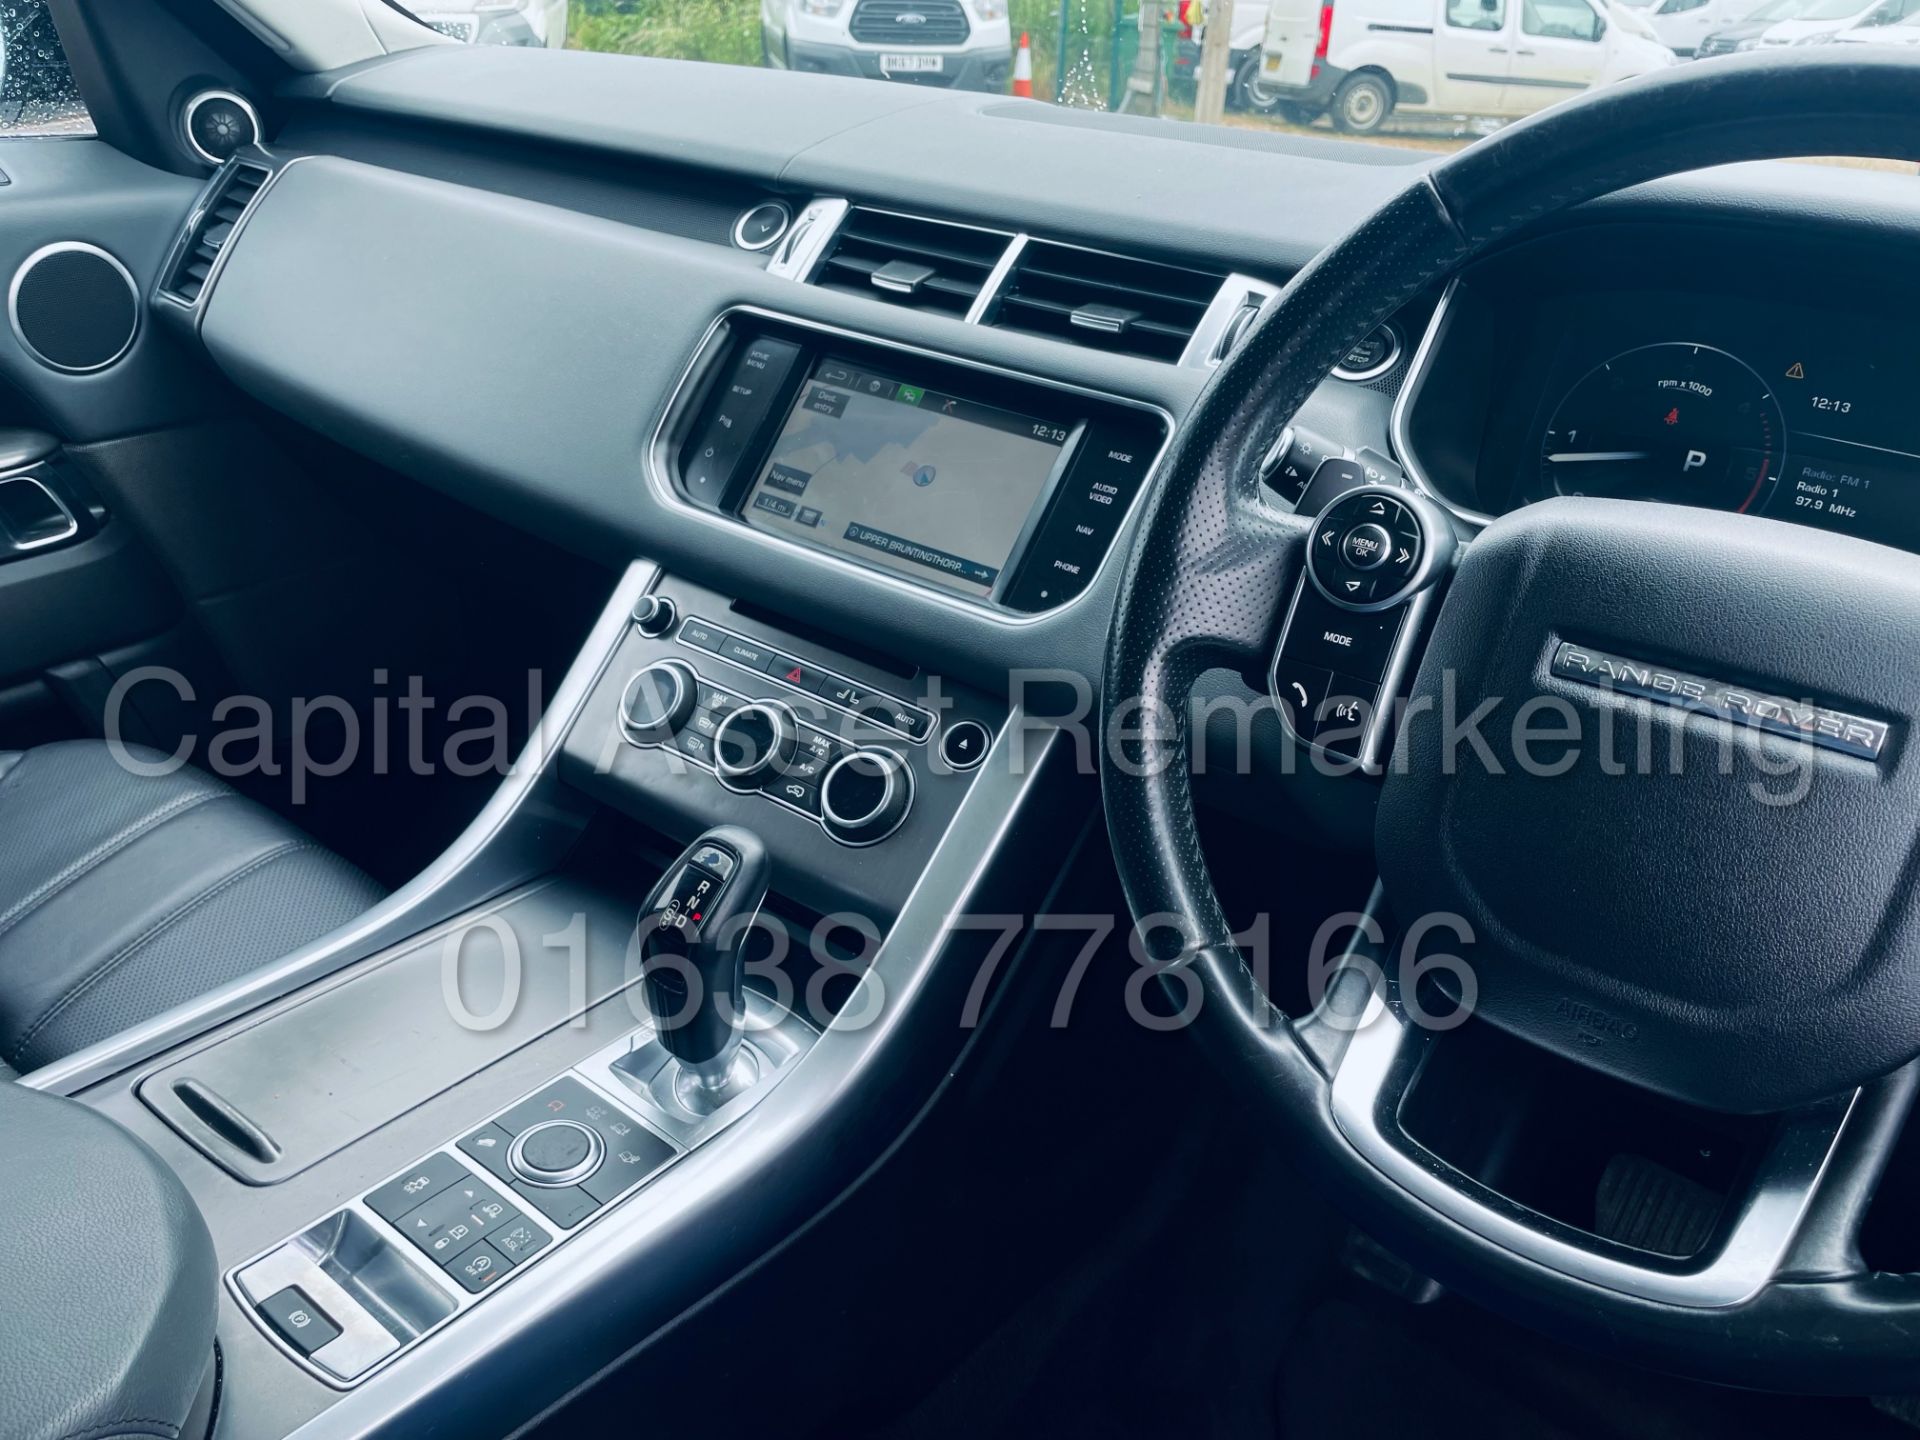 On Sale RANGE ROVER SPORT *SPECIAL EDITION* (2014) '3.0 TDV6 - AUTO' *SAT NAV & PAN ROOF* (TOP SPEC) - Image 42 of 54